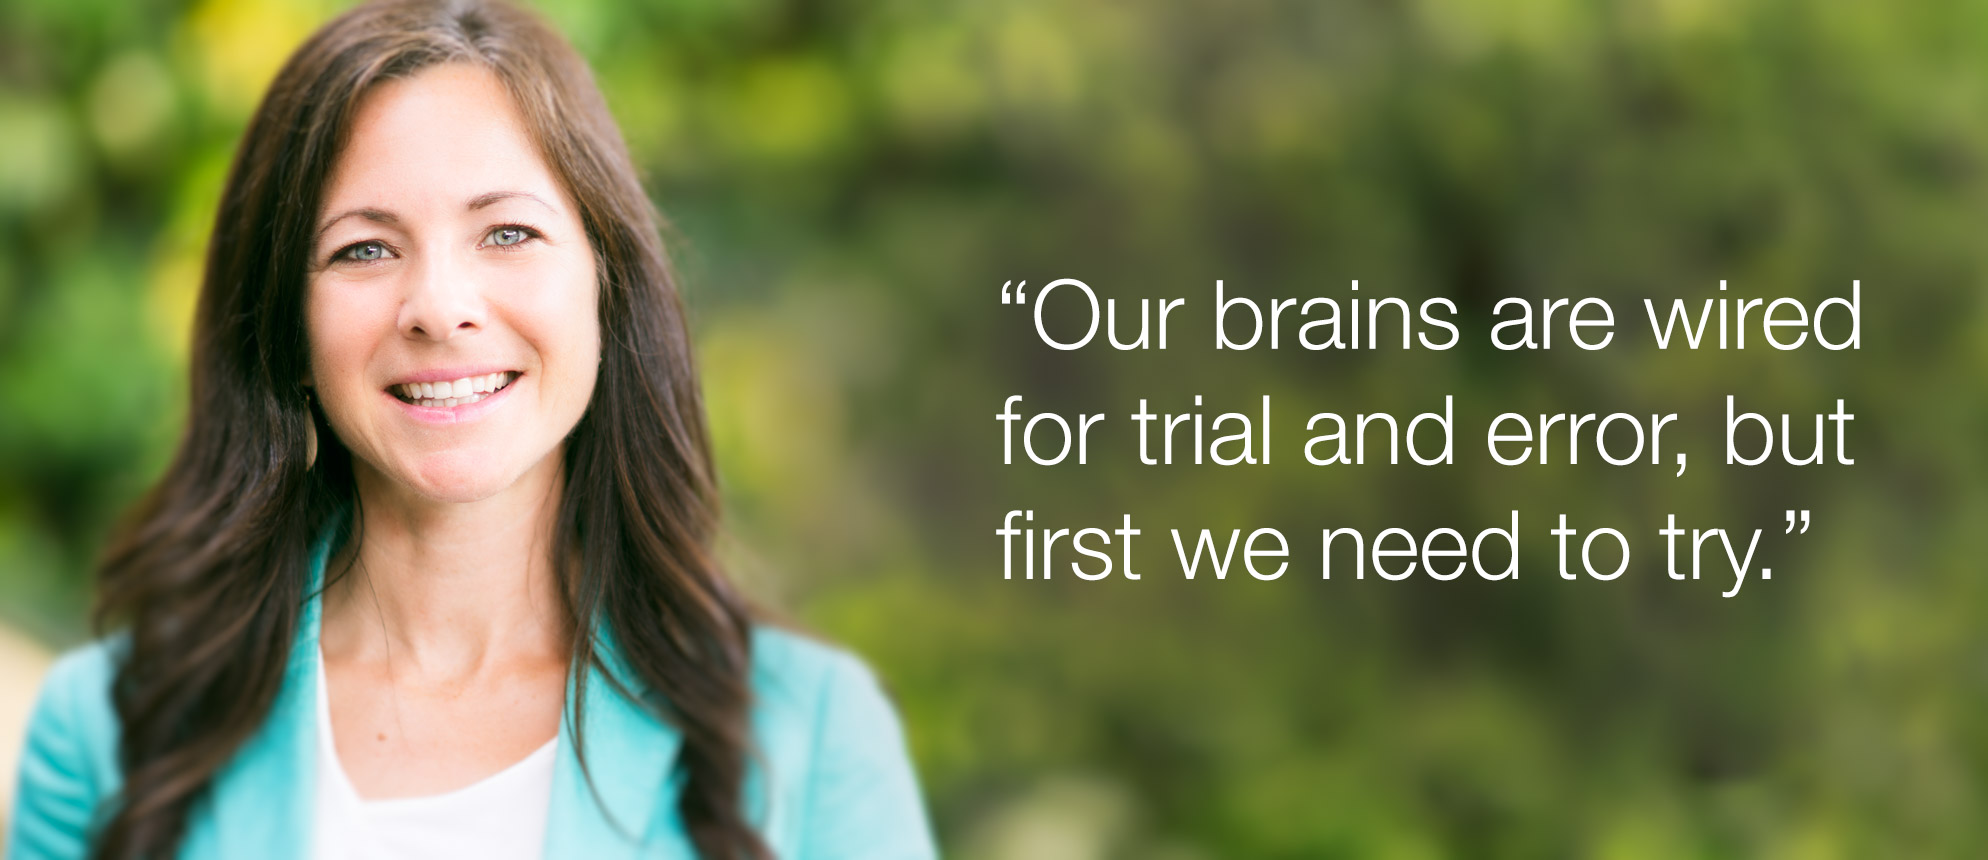 Dr. Mandy Wintink: "Our brains are wired for trial and error, but first we need to try."